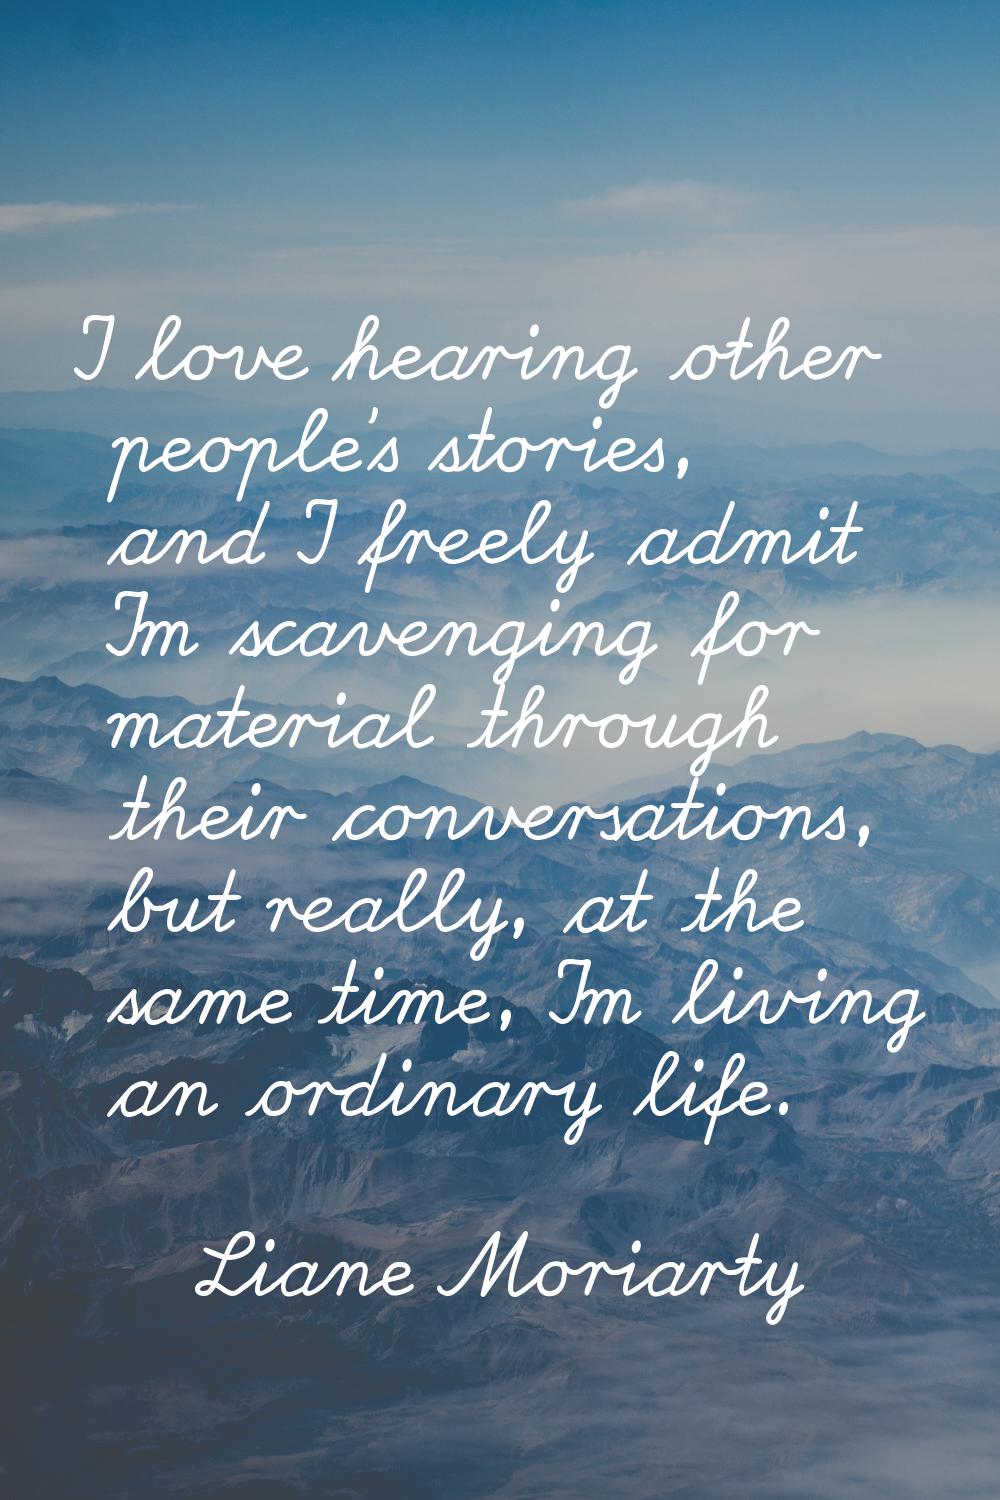 I love hearing other people's stories, and I freely admit I'm scavenging for material through their